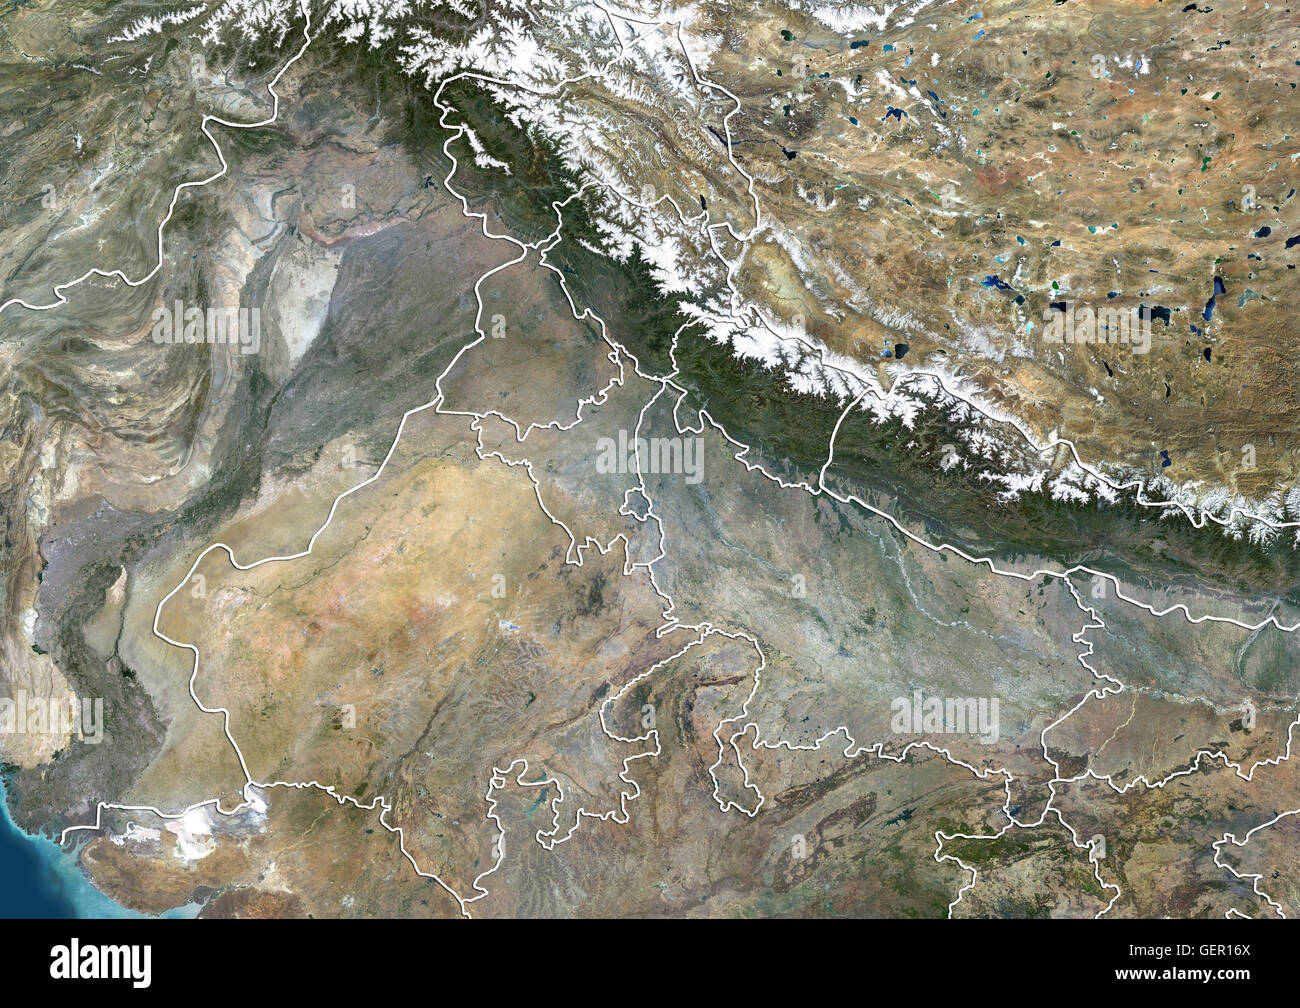 Satellite view of North India (with administrative boundaries). This image was compiled from data acquired by Landsat 8 satellite in 2014. Stock Photo